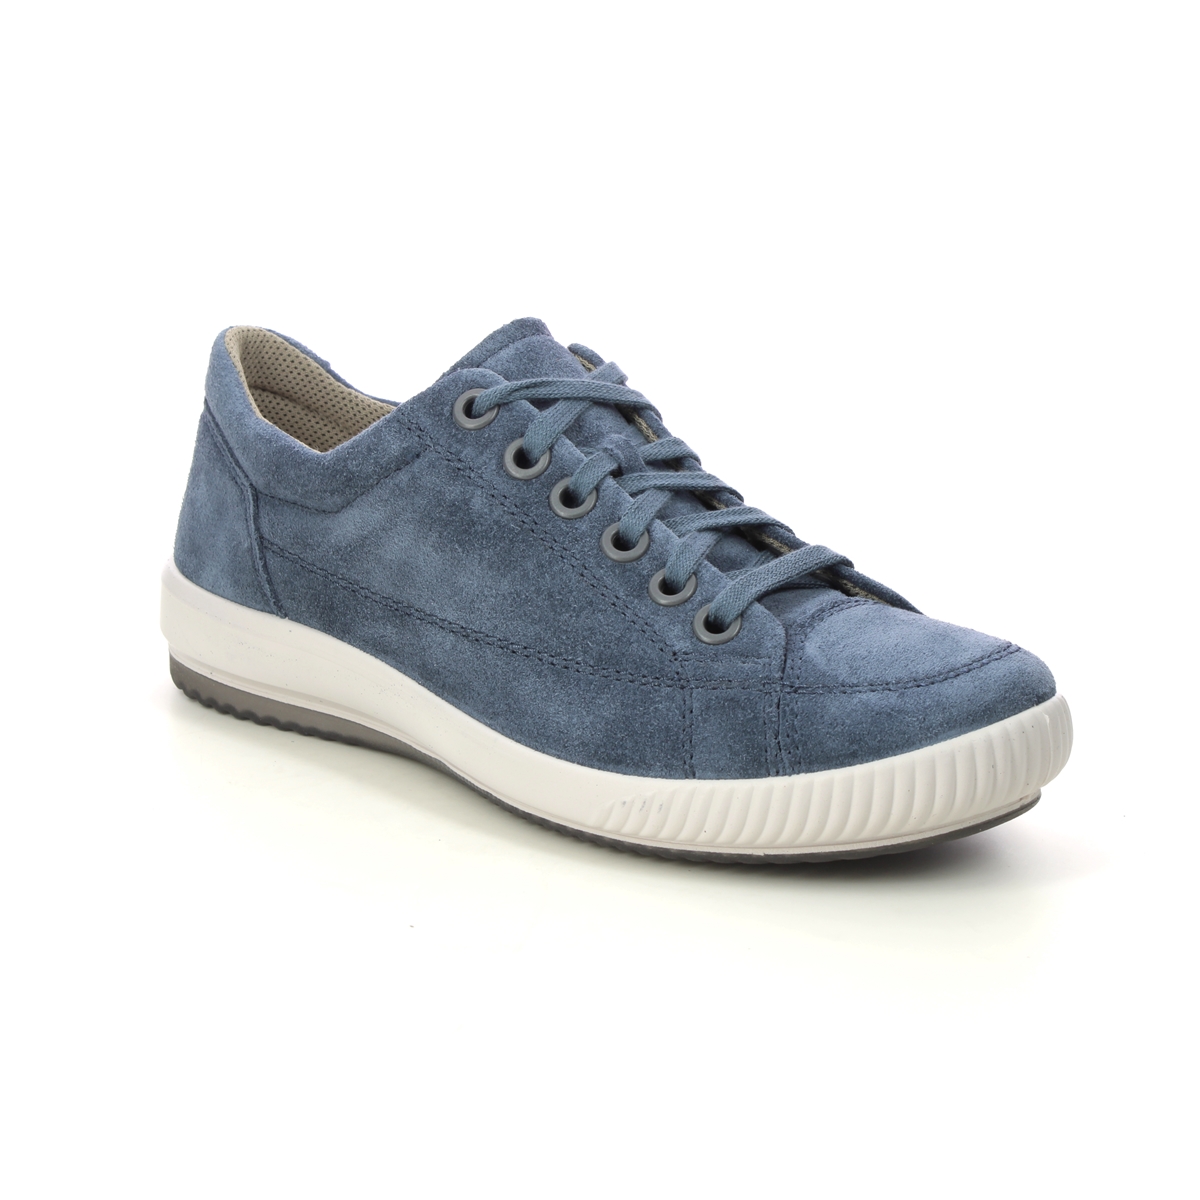 Legero Tanaro 5 Stitch Blue Suede Womens Lacing Shoes 2000161-8600 In Size 7.5 In Plain Blue Suede